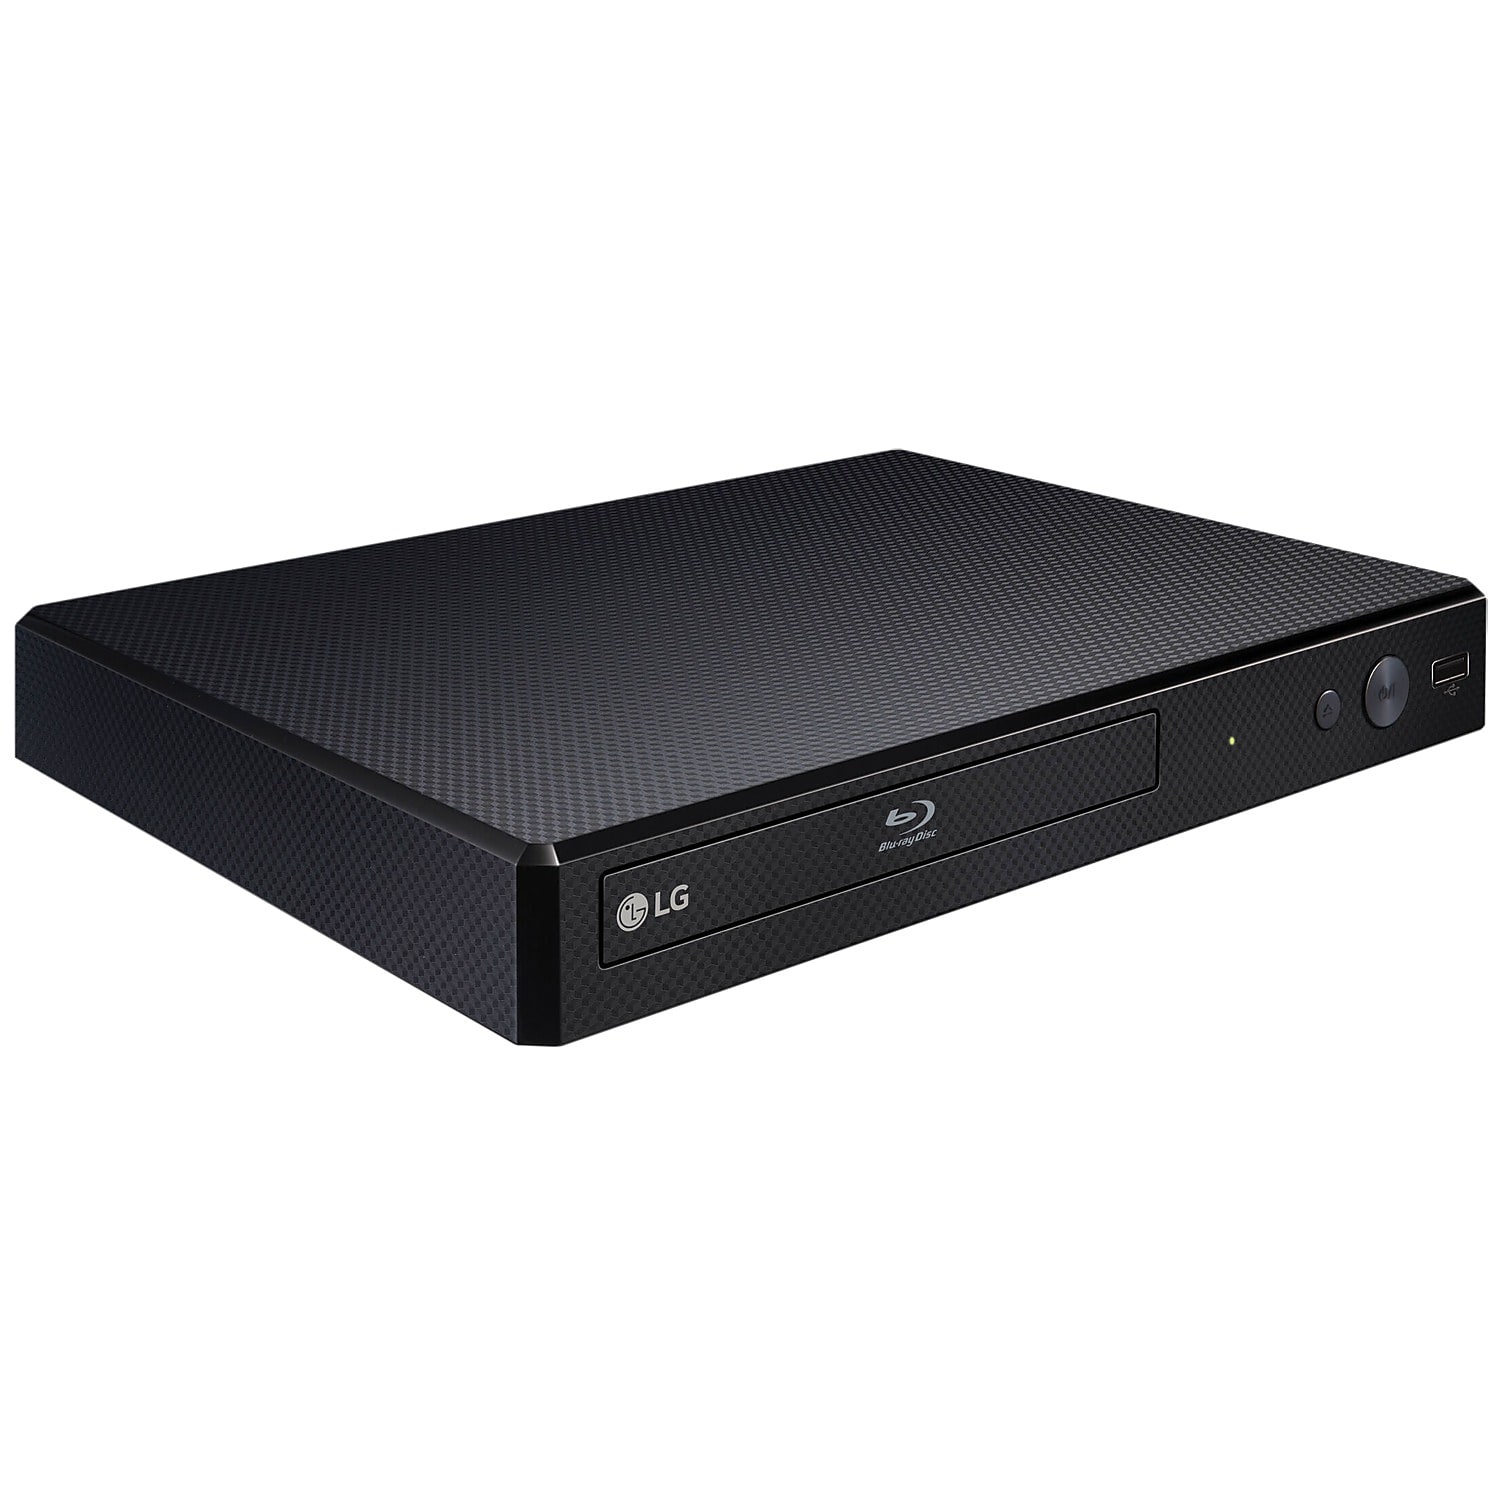 LG BP350 Blu-ray Player with Streaming Services and Built-in Wi-Fi - image 4 of 4